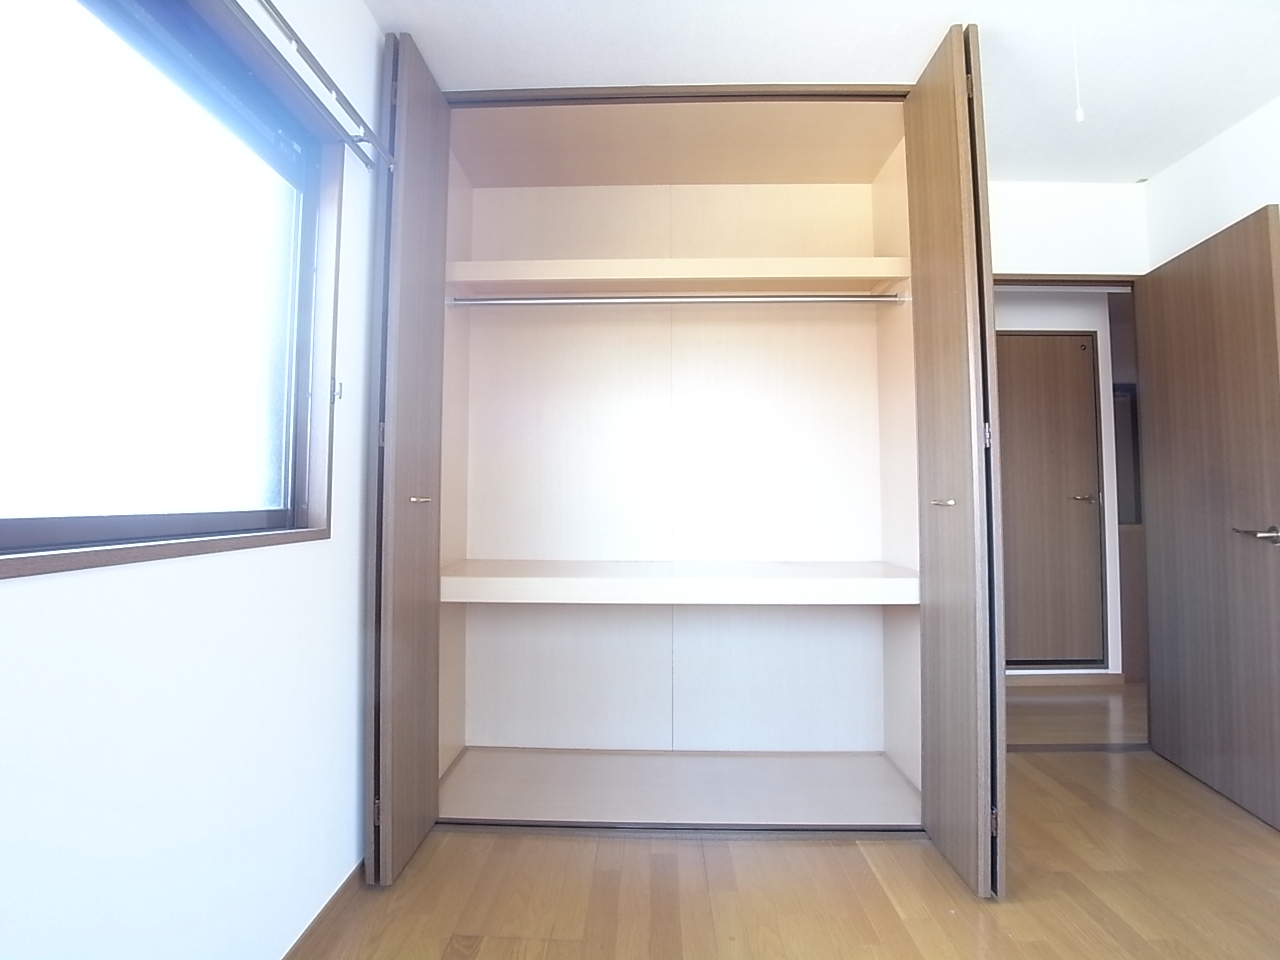 Living and room. Western-style storage closet